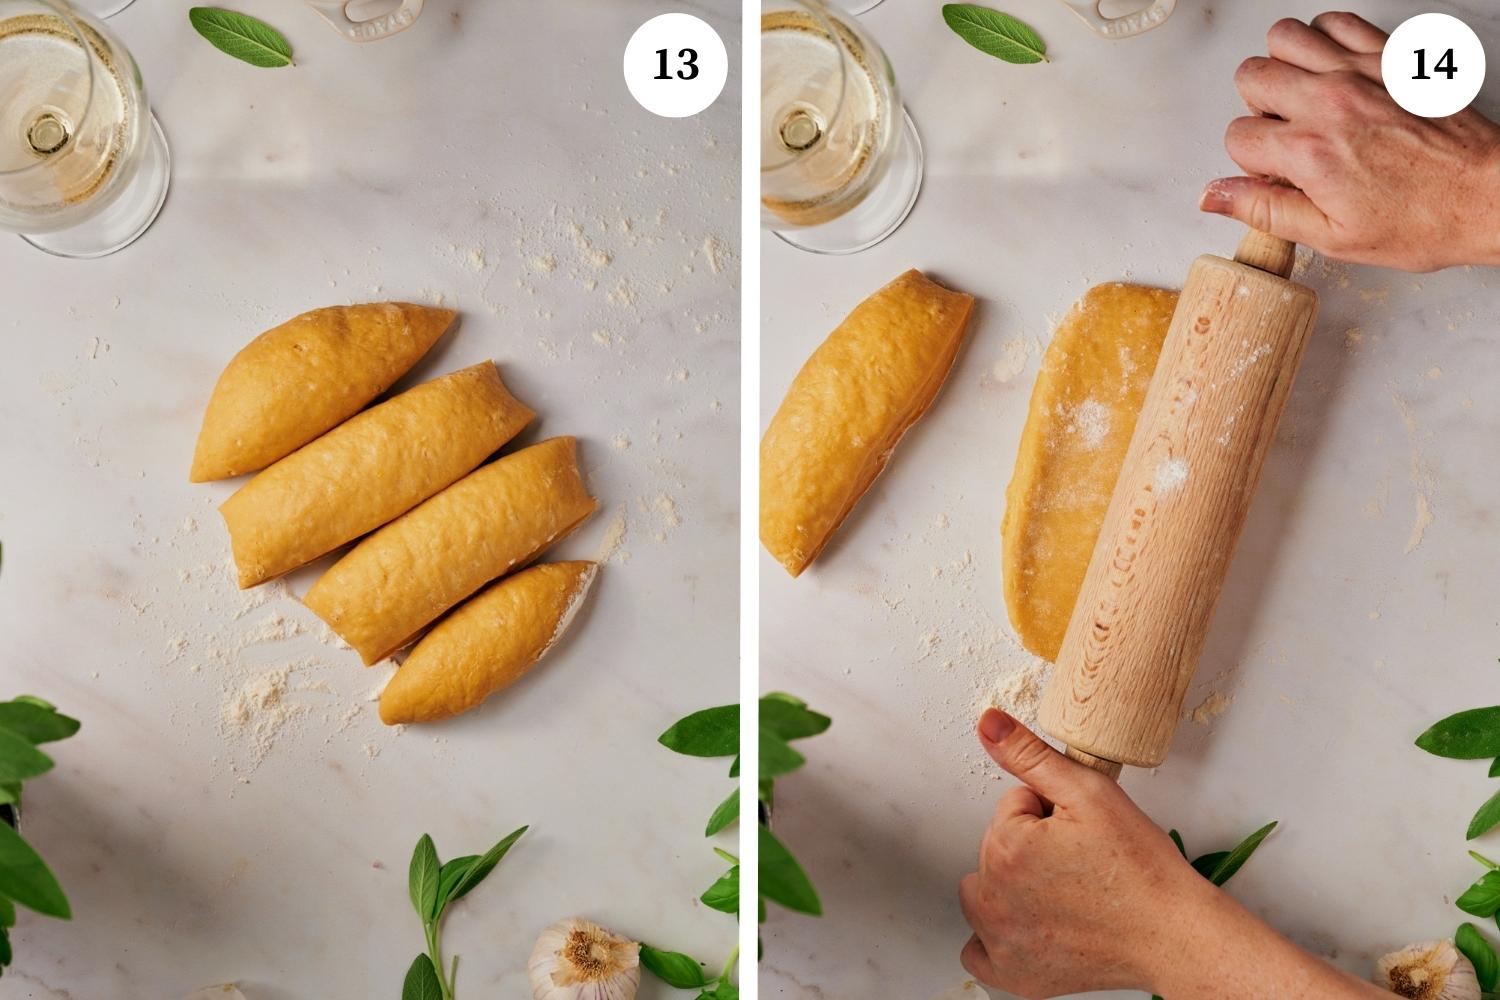 Process of making Lobster Ravioli: cut the dough into 1-inch strips